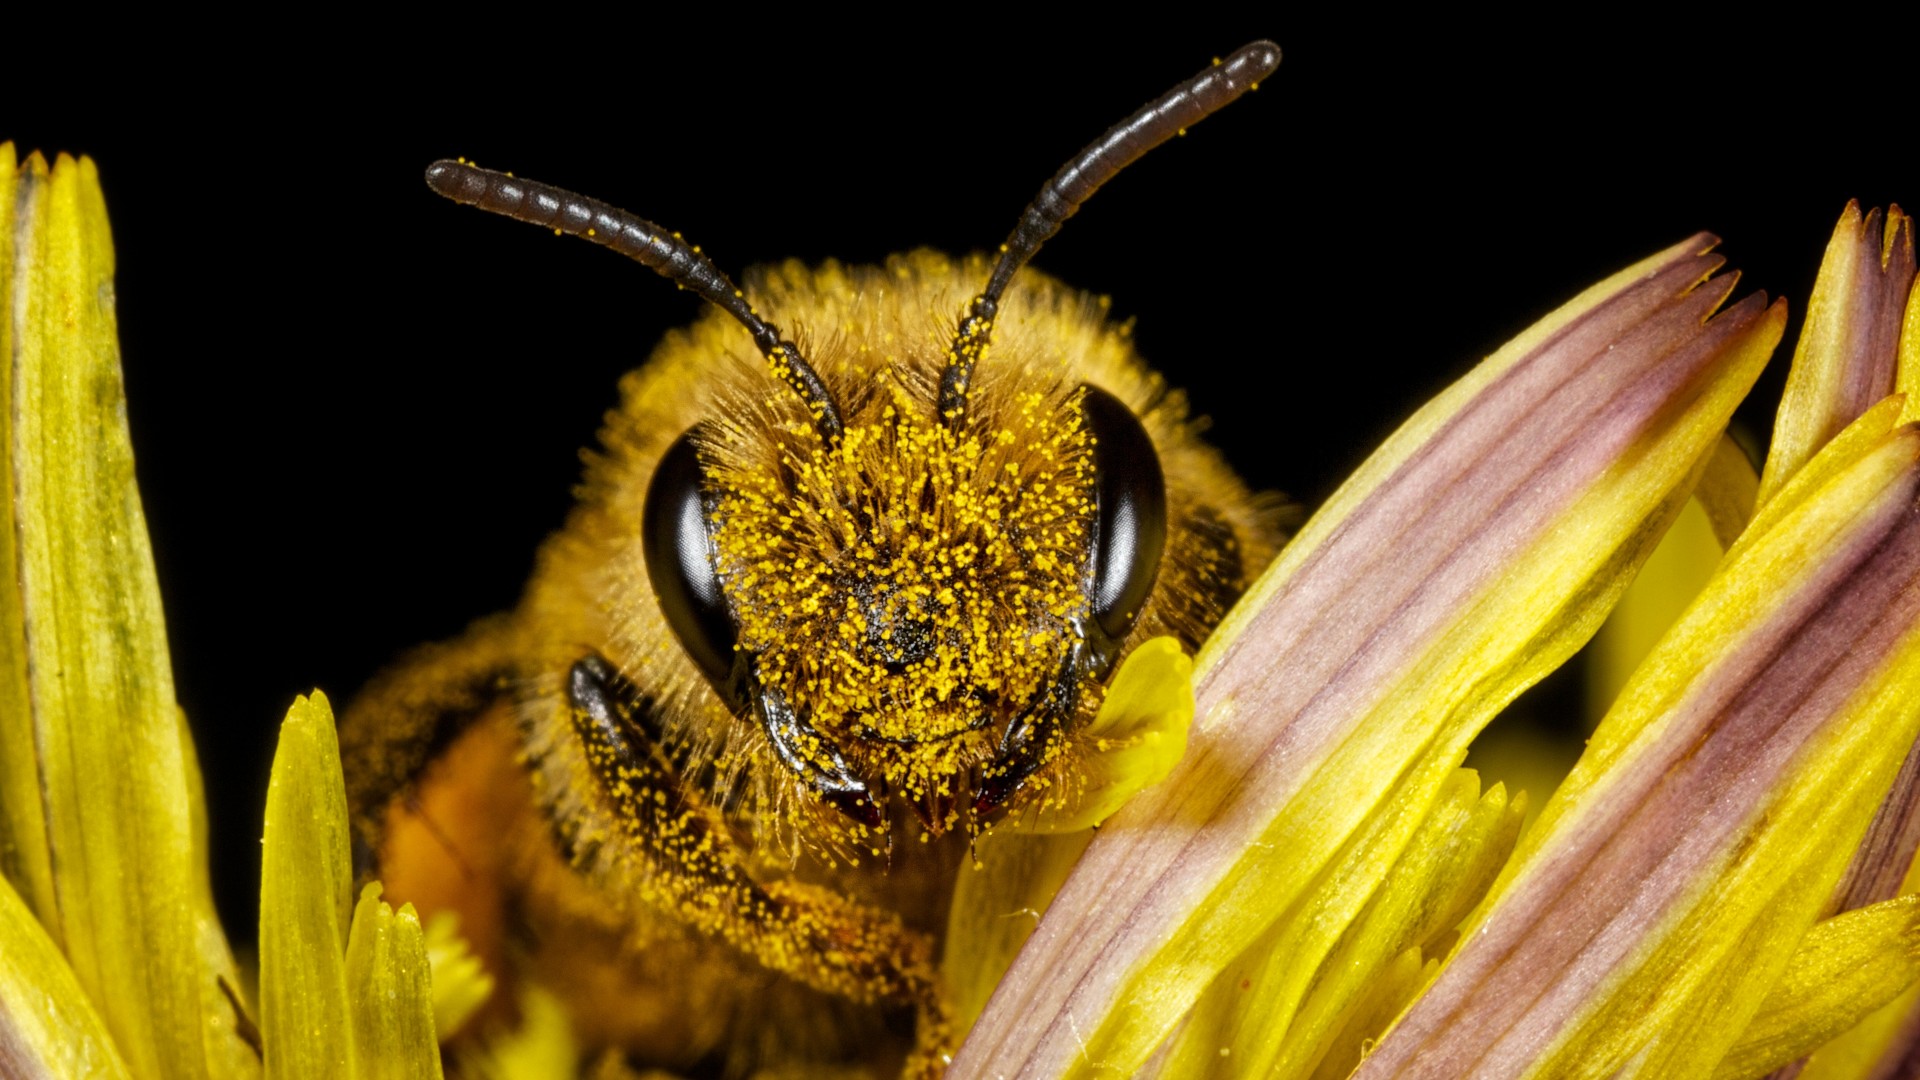 Close-up of honey bee (apis mellifera). The bee is facing the camera and is covered with yellow pollen. It is perched on a pink and yellow flower.